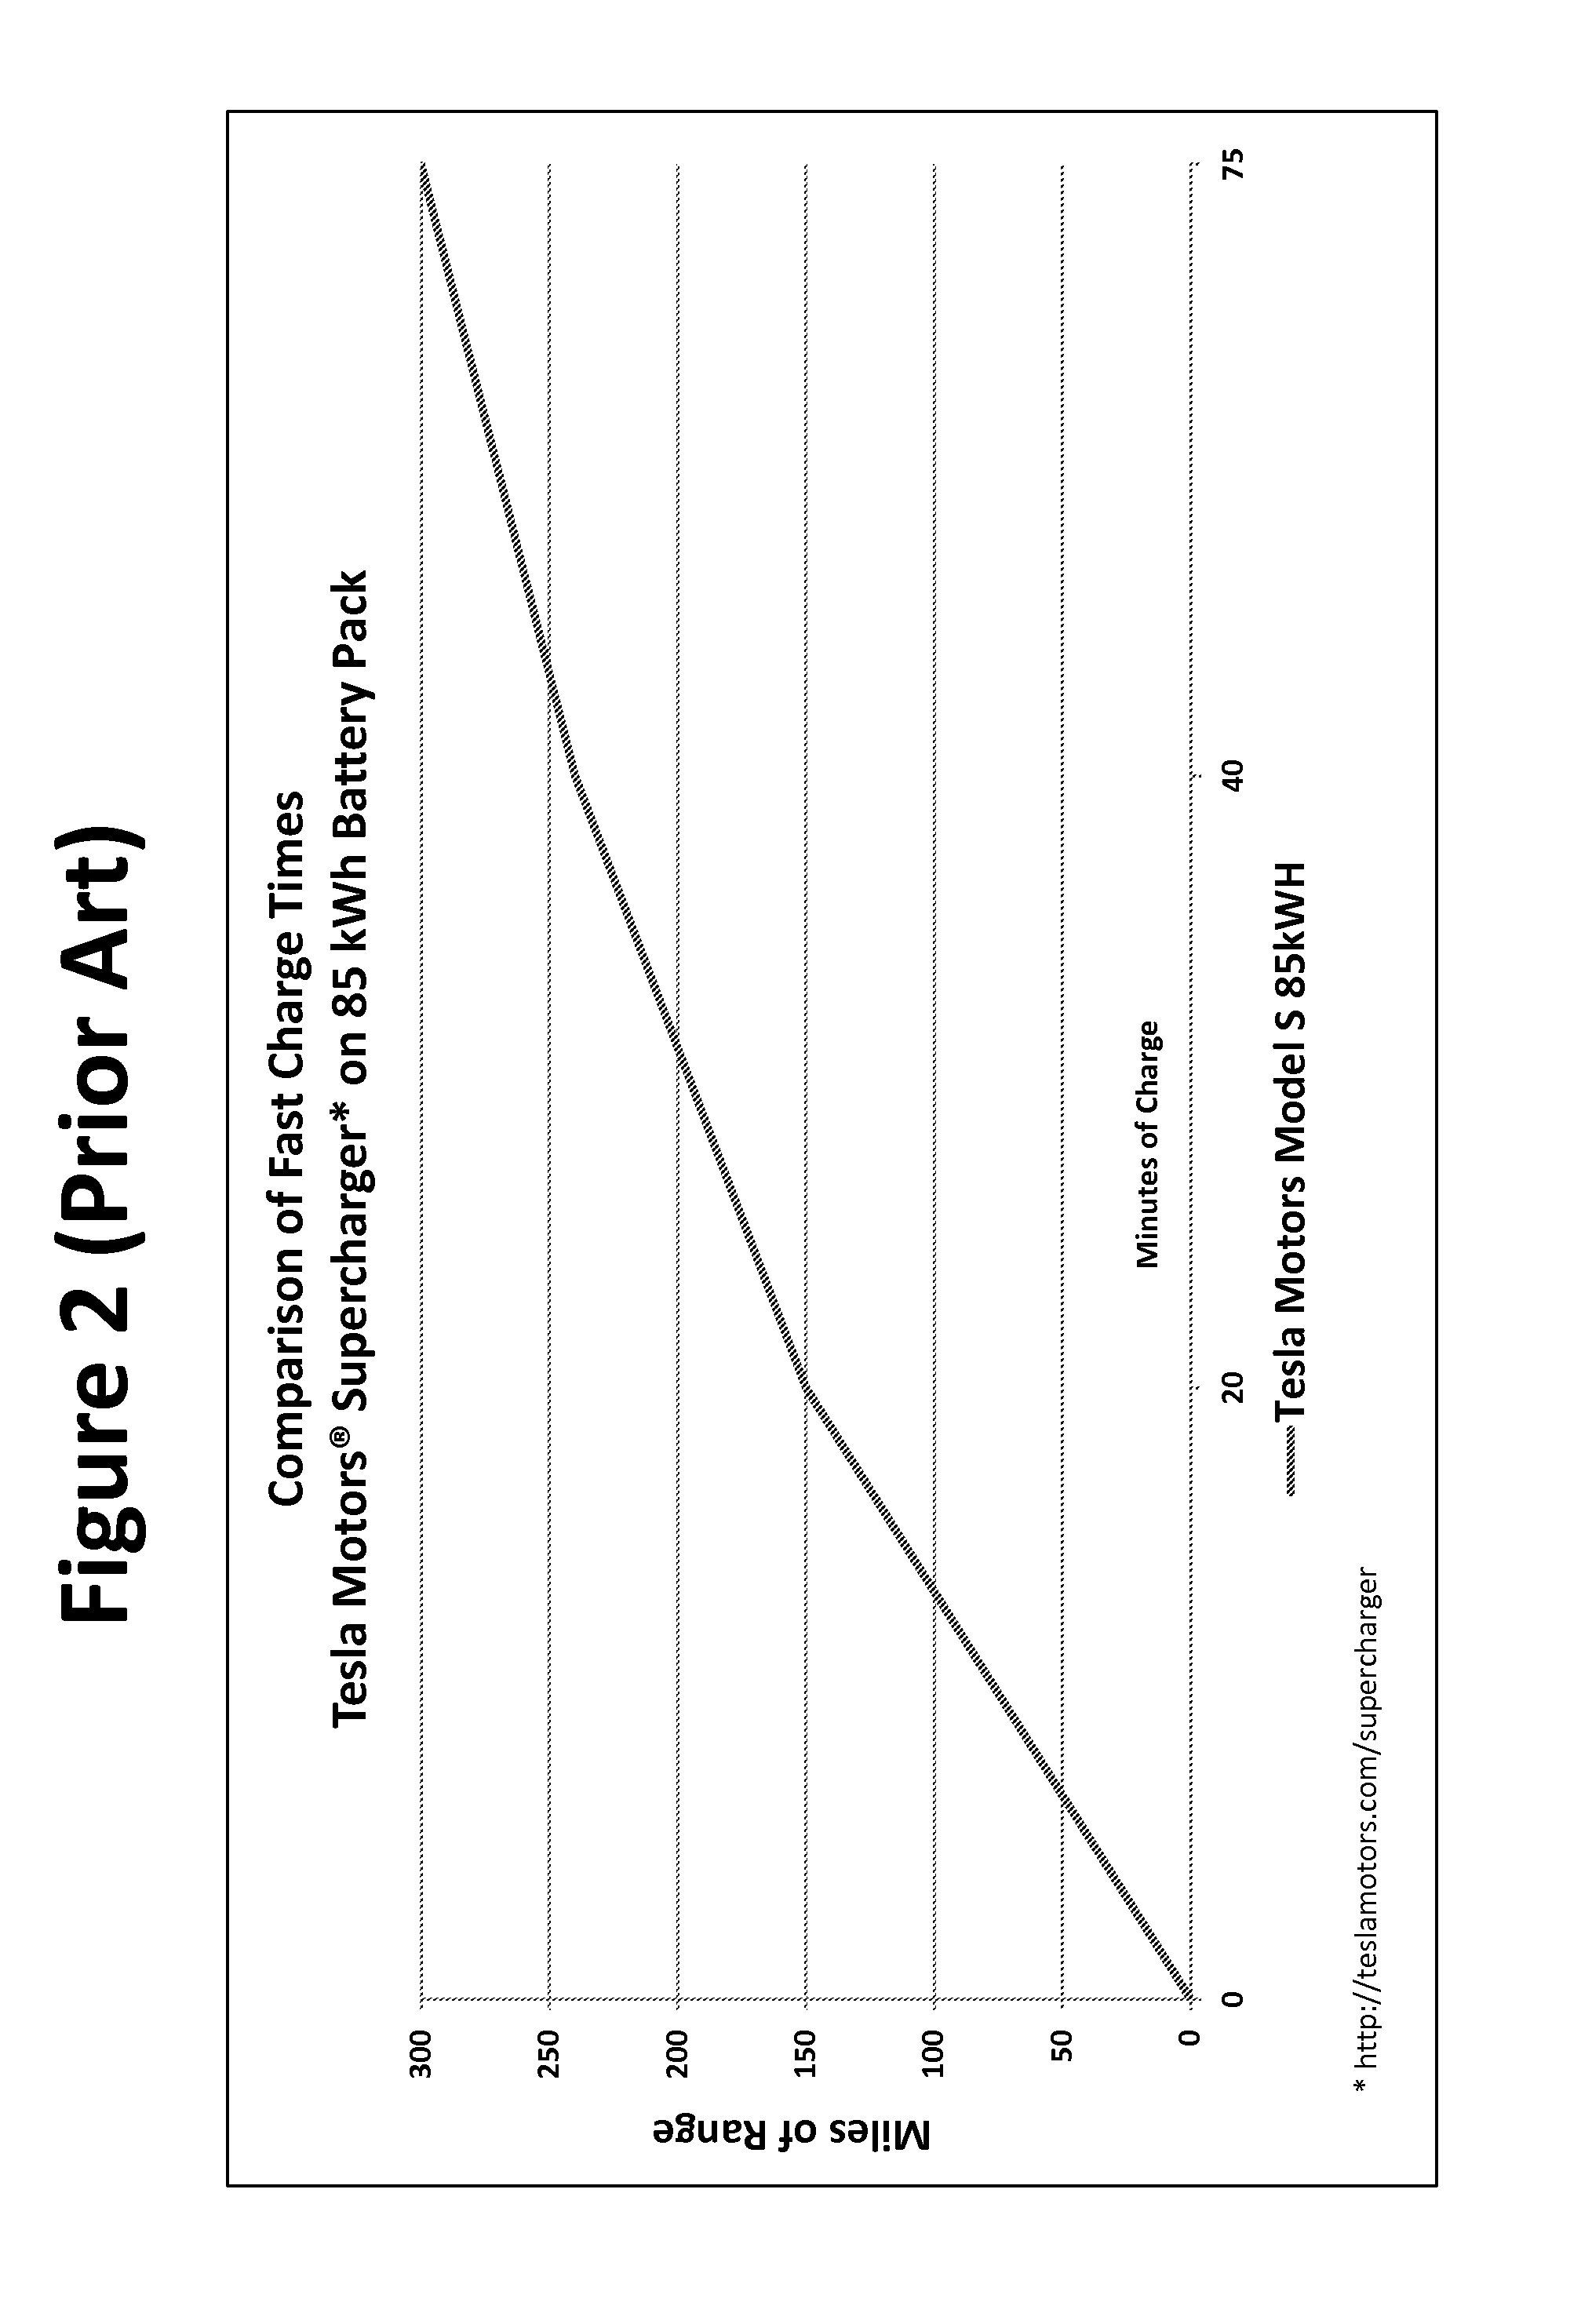 Pulse battery charger methods and systems for improved charging of lithium ion batteries